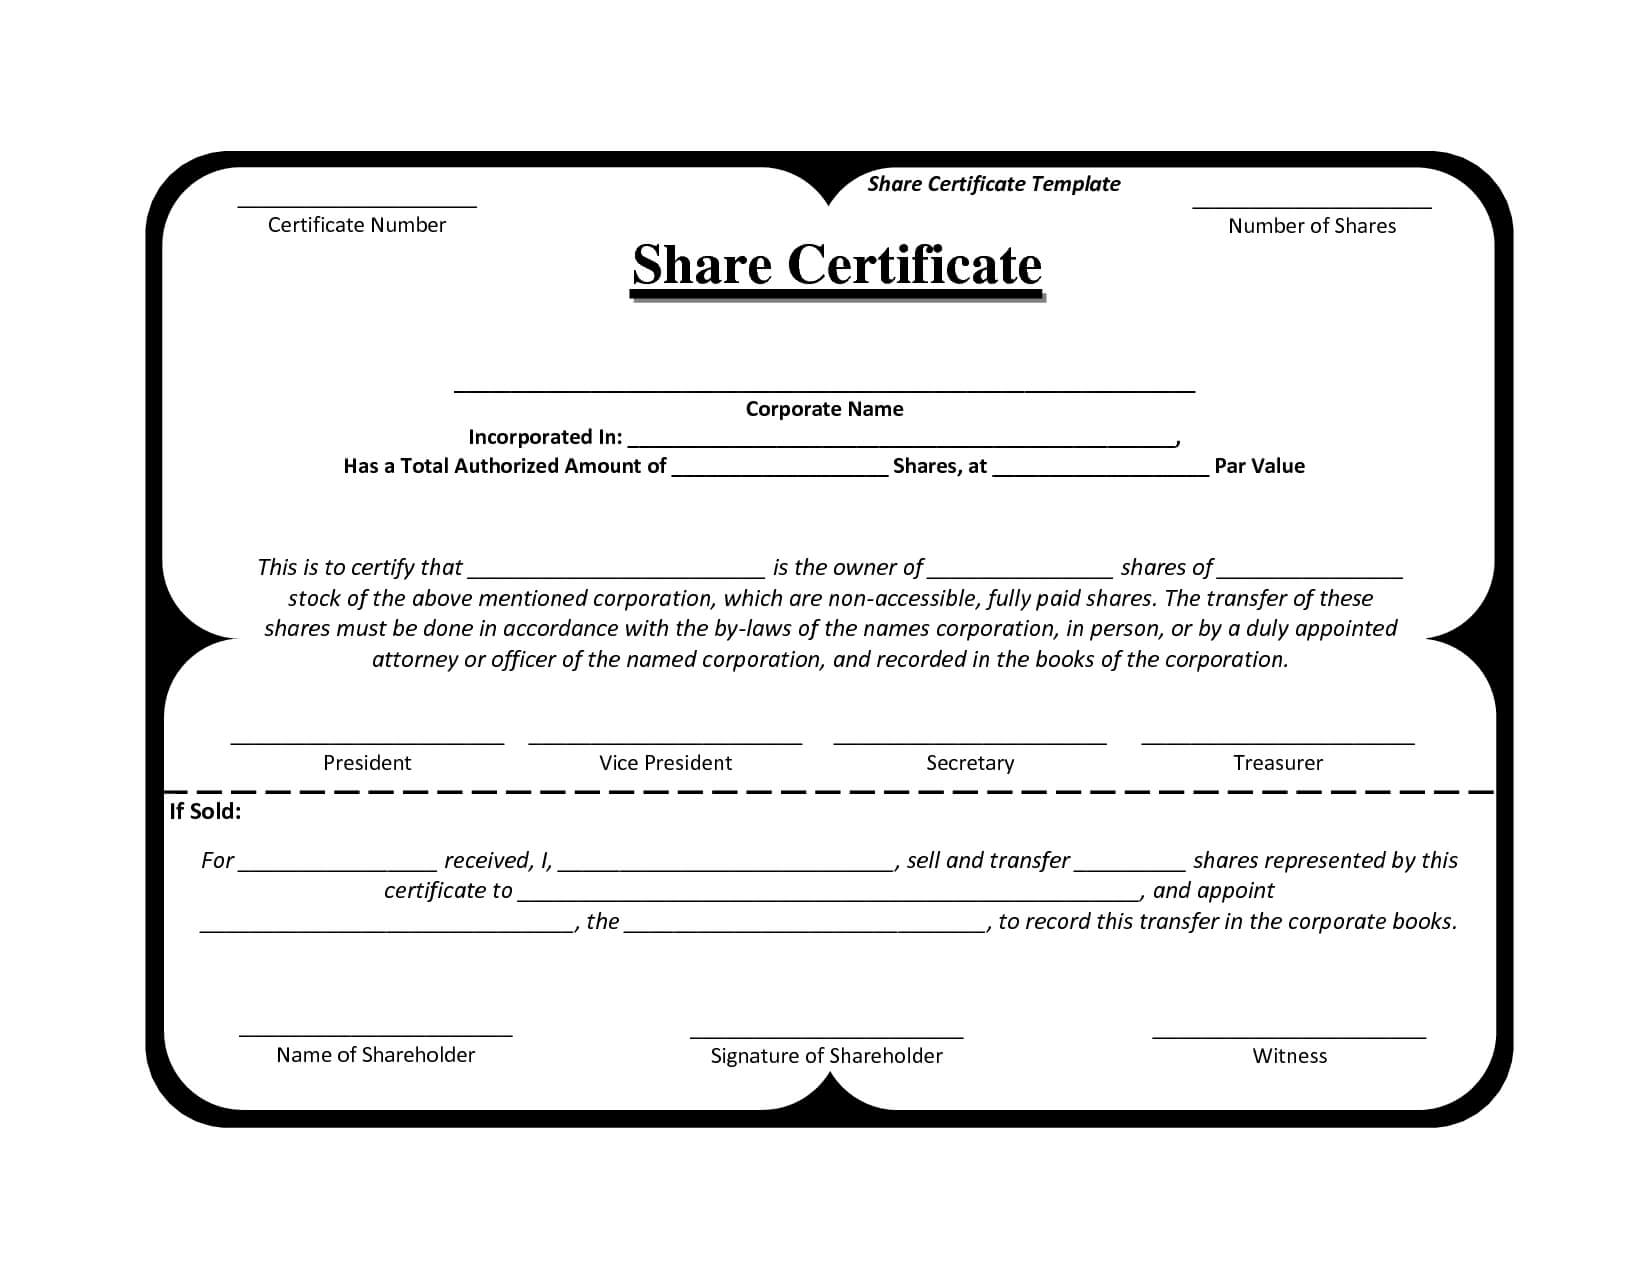 Template Share Certificate Rbscqi9V | Certificate Templates Intended For Template For Share Certificate